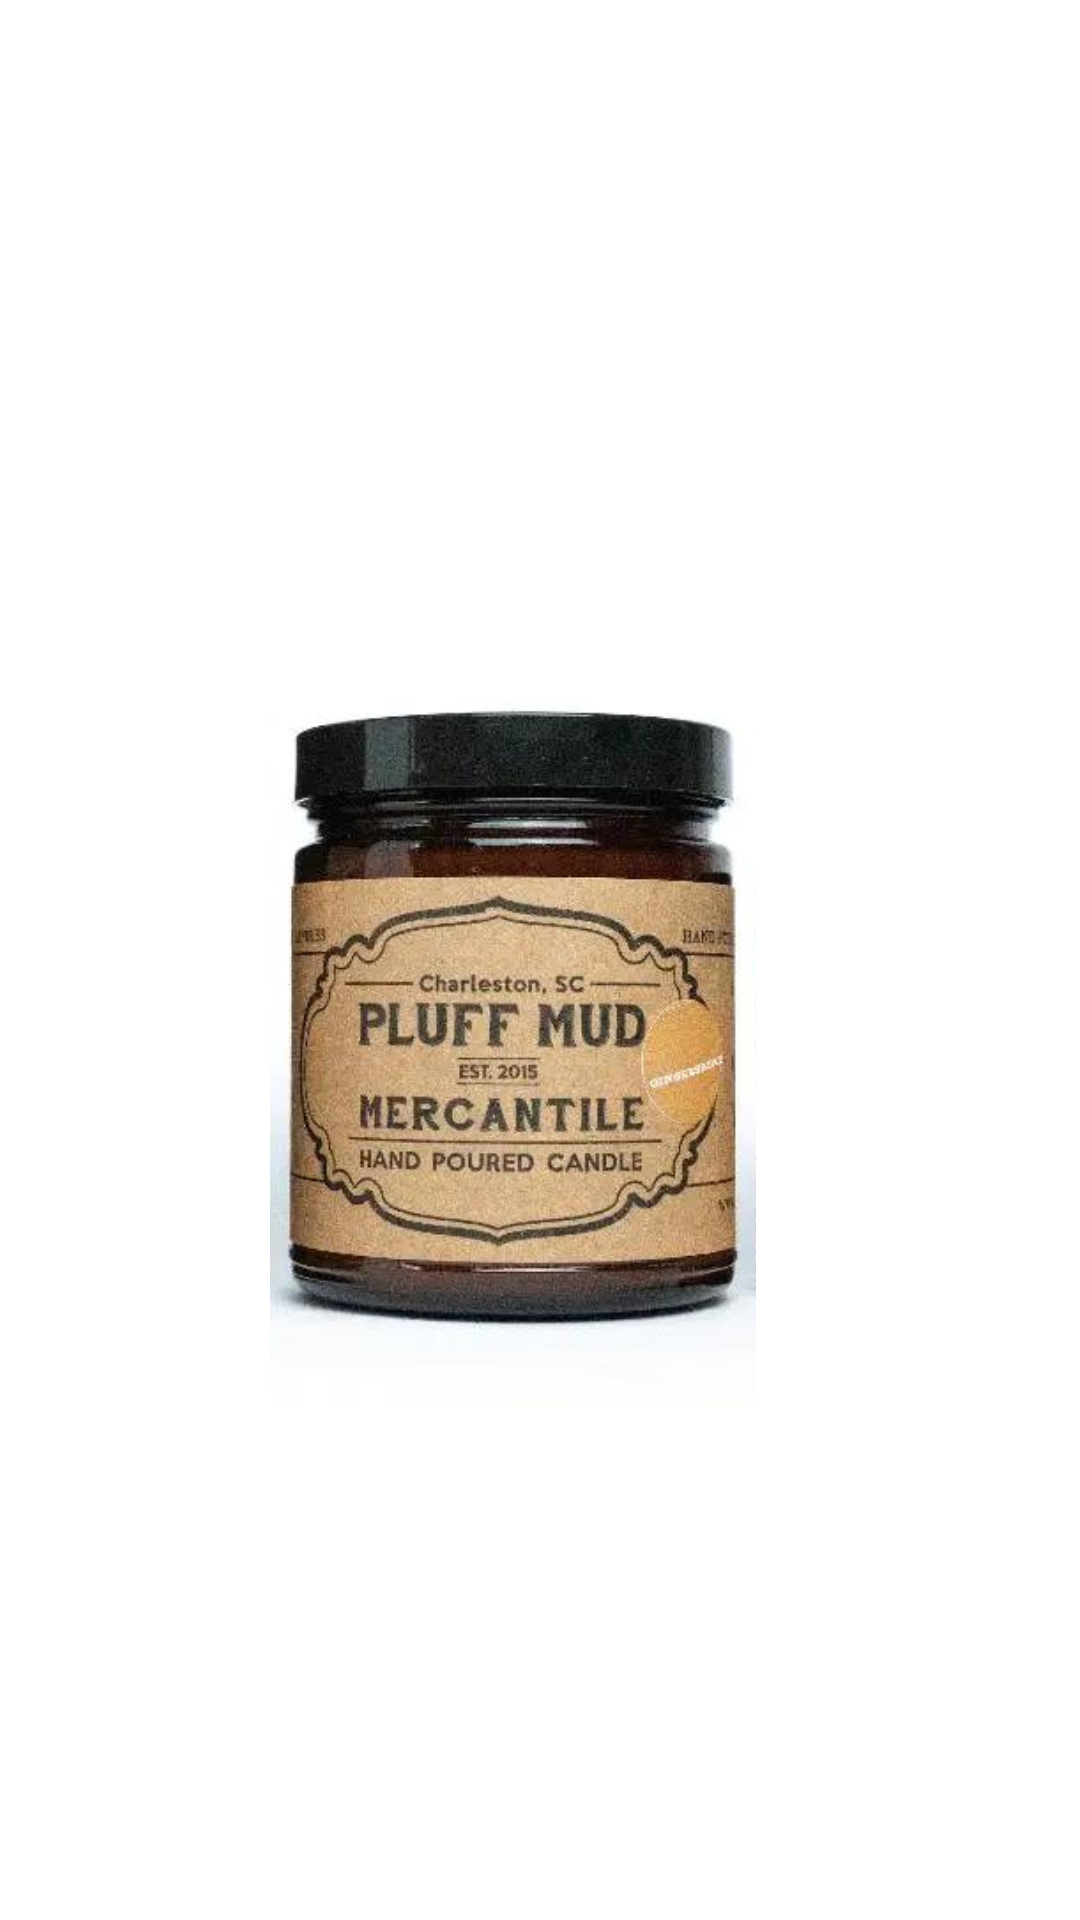 Boat Deck Hand Poured Soy Candle - Pluff Mud Mercantile